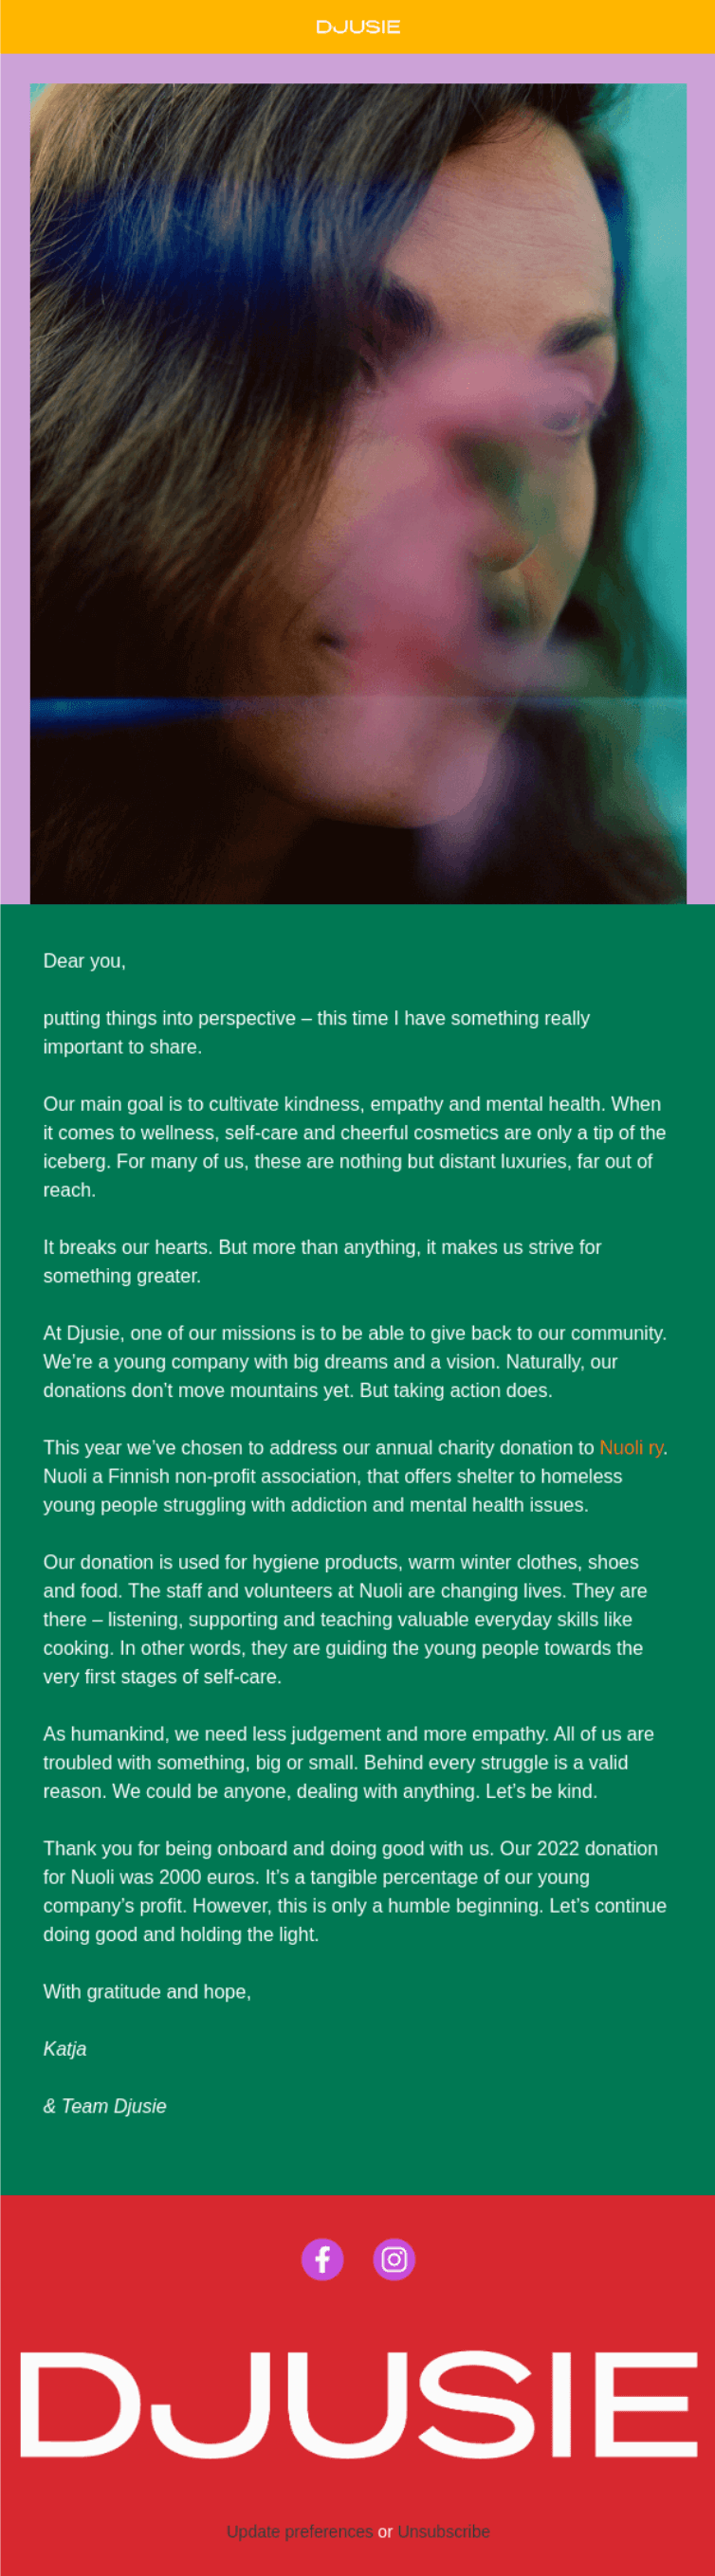 A thank you email sent by the Djusie’s team at the end of their first donation campaign in 2022